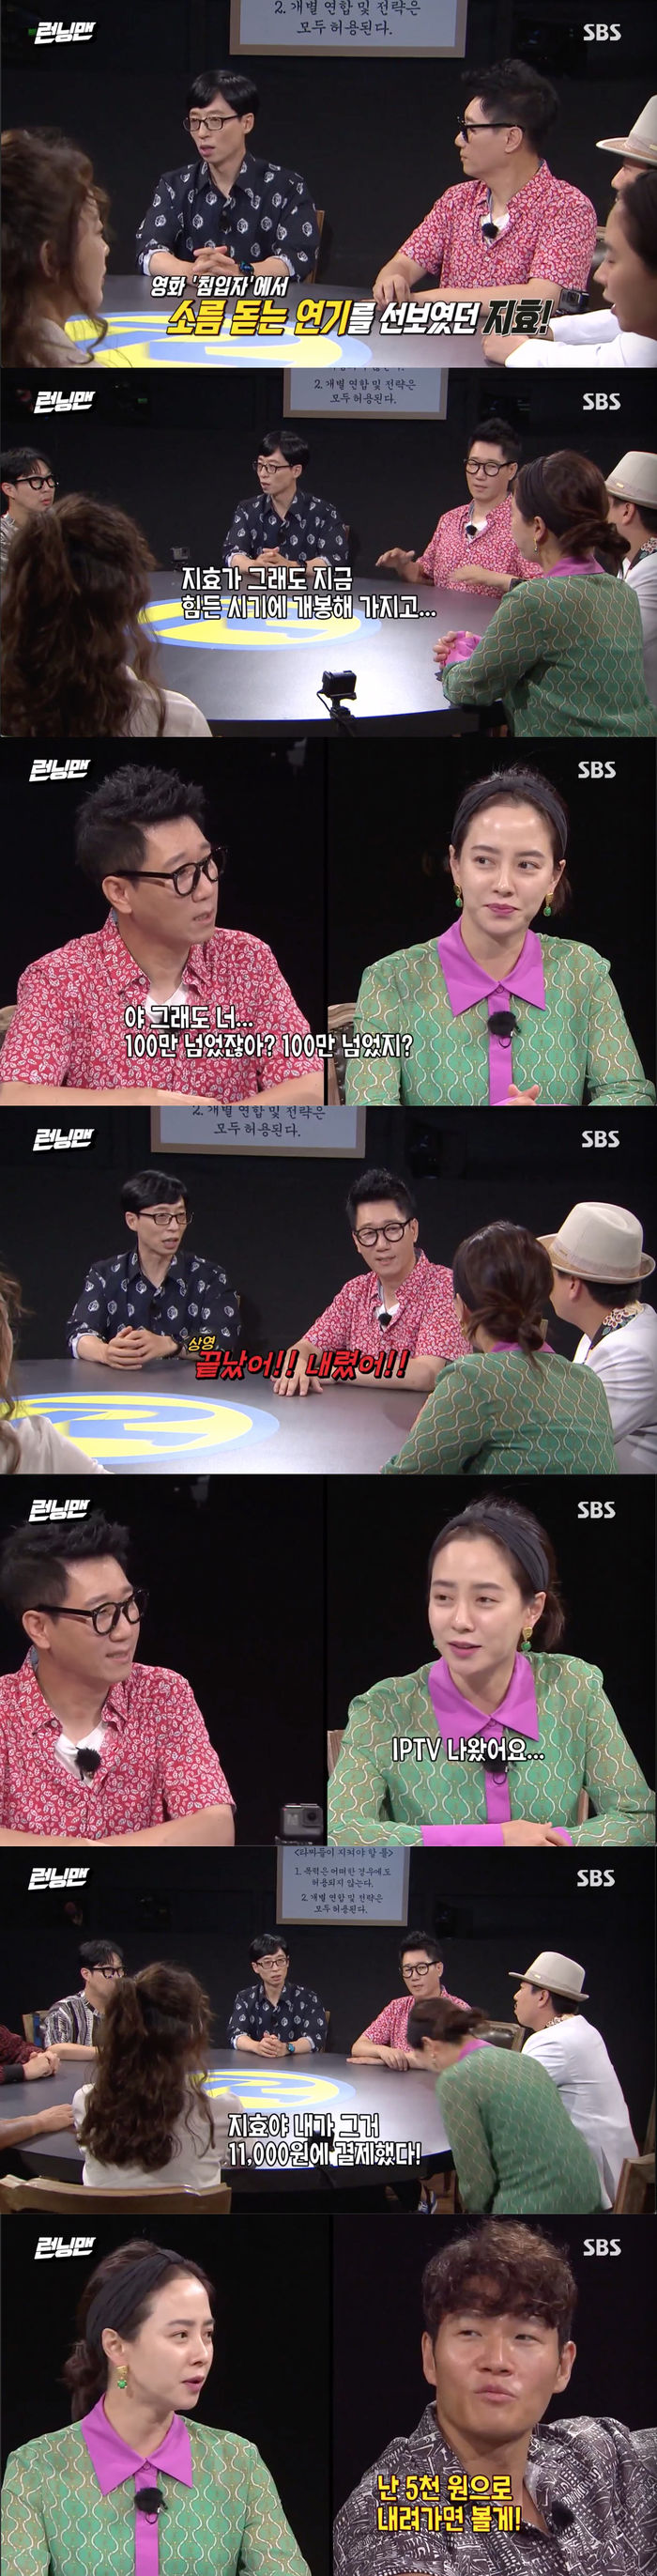 Yoo Jae-Suk cheered Song Ji-hyo with IPTV PaymentOn SBS Running Man broadcast on 19th, Tazza: The High Rollers: War of the Punters Race was held.The day was held as a war race for the players who gathered at the entertainment Tazza: The High Rollers from all over the country and picked the best Tazza: The High Rollers.Yoo Jae-Suk mentioned the recent status of the members before the race.I did a really good job in the movie The Intrusion, he said of Song Ji-hyo. I opened it even though it was a difficult time.Ji Suk-jin said, But its over a million. The members who heard it said, Dont talk about it, its not like that these days.Ji Suk-jin then comforted Song Ji-hyo, saying, Its going to be over soon, but the film was already released on IPTV.Yoo Jae-Suk has hired Ji Suk-jin.Yoo Jae-Suk also said, Ji Hyo, I paid for 11,000 won, and Song Ji-hyo said, Thank you for your brother.Haha also said, Goeun sister paid - I have not seen it yet.Kim Jong-kook said, I will pay if I go down to 5,000 won. It was hard to pay more than 10,000 won.